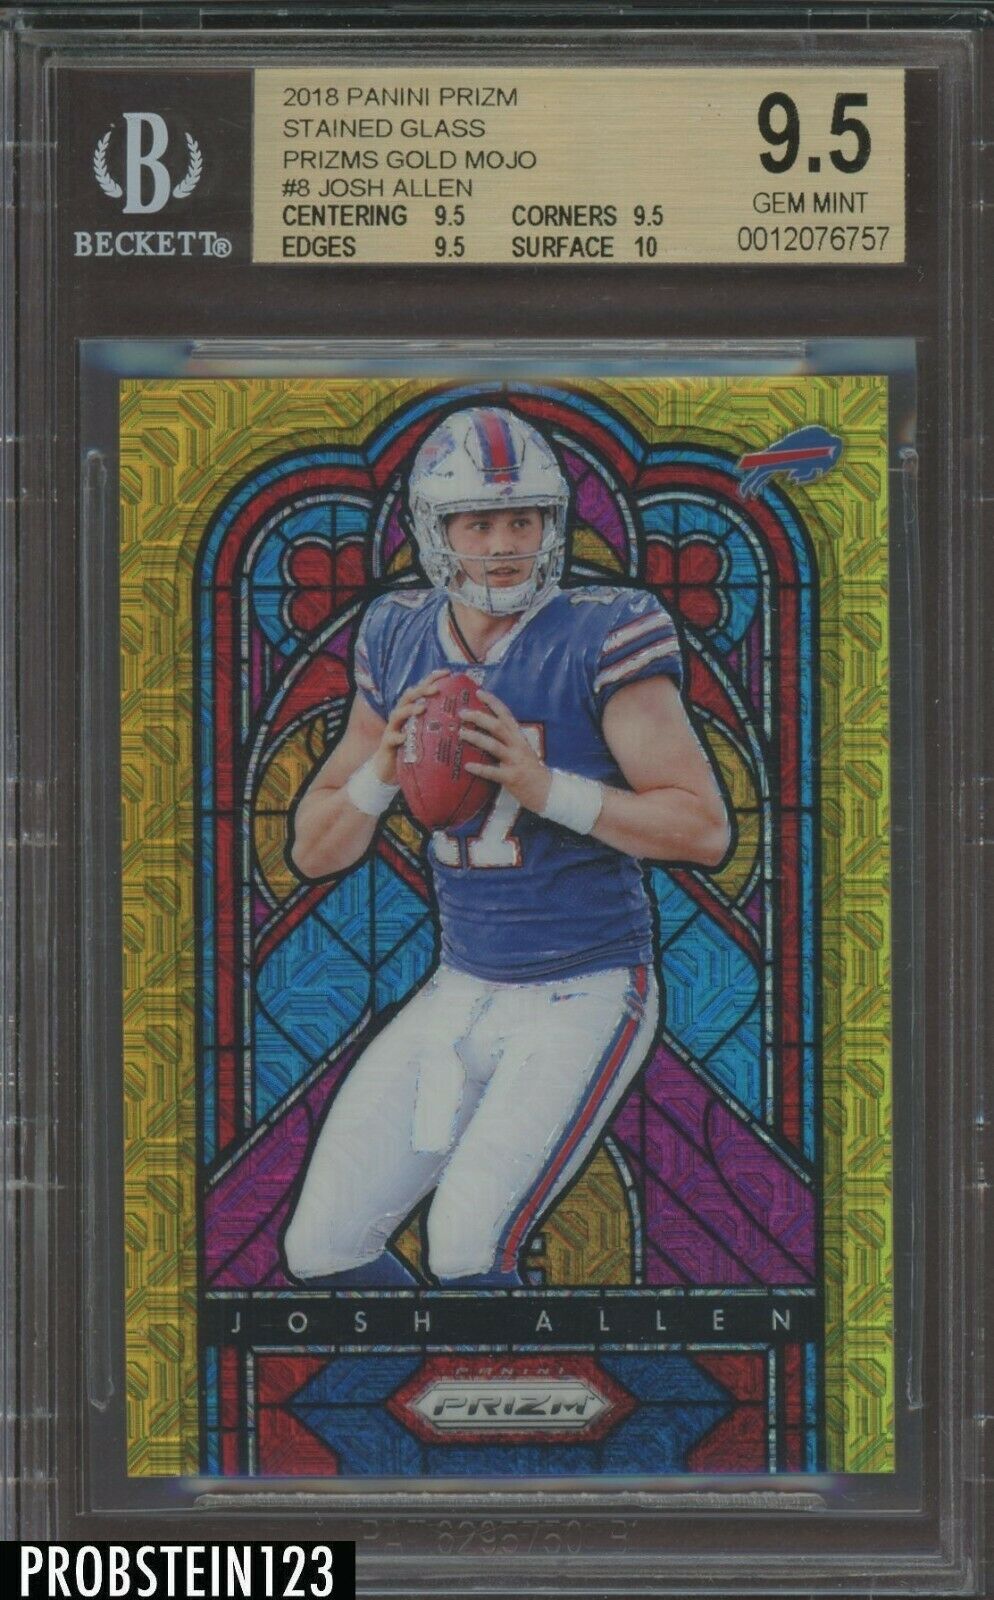 2018 Panini Gold Mojo Prizm Stained Glass Josh Allen RC Rookie 910 BGS 95